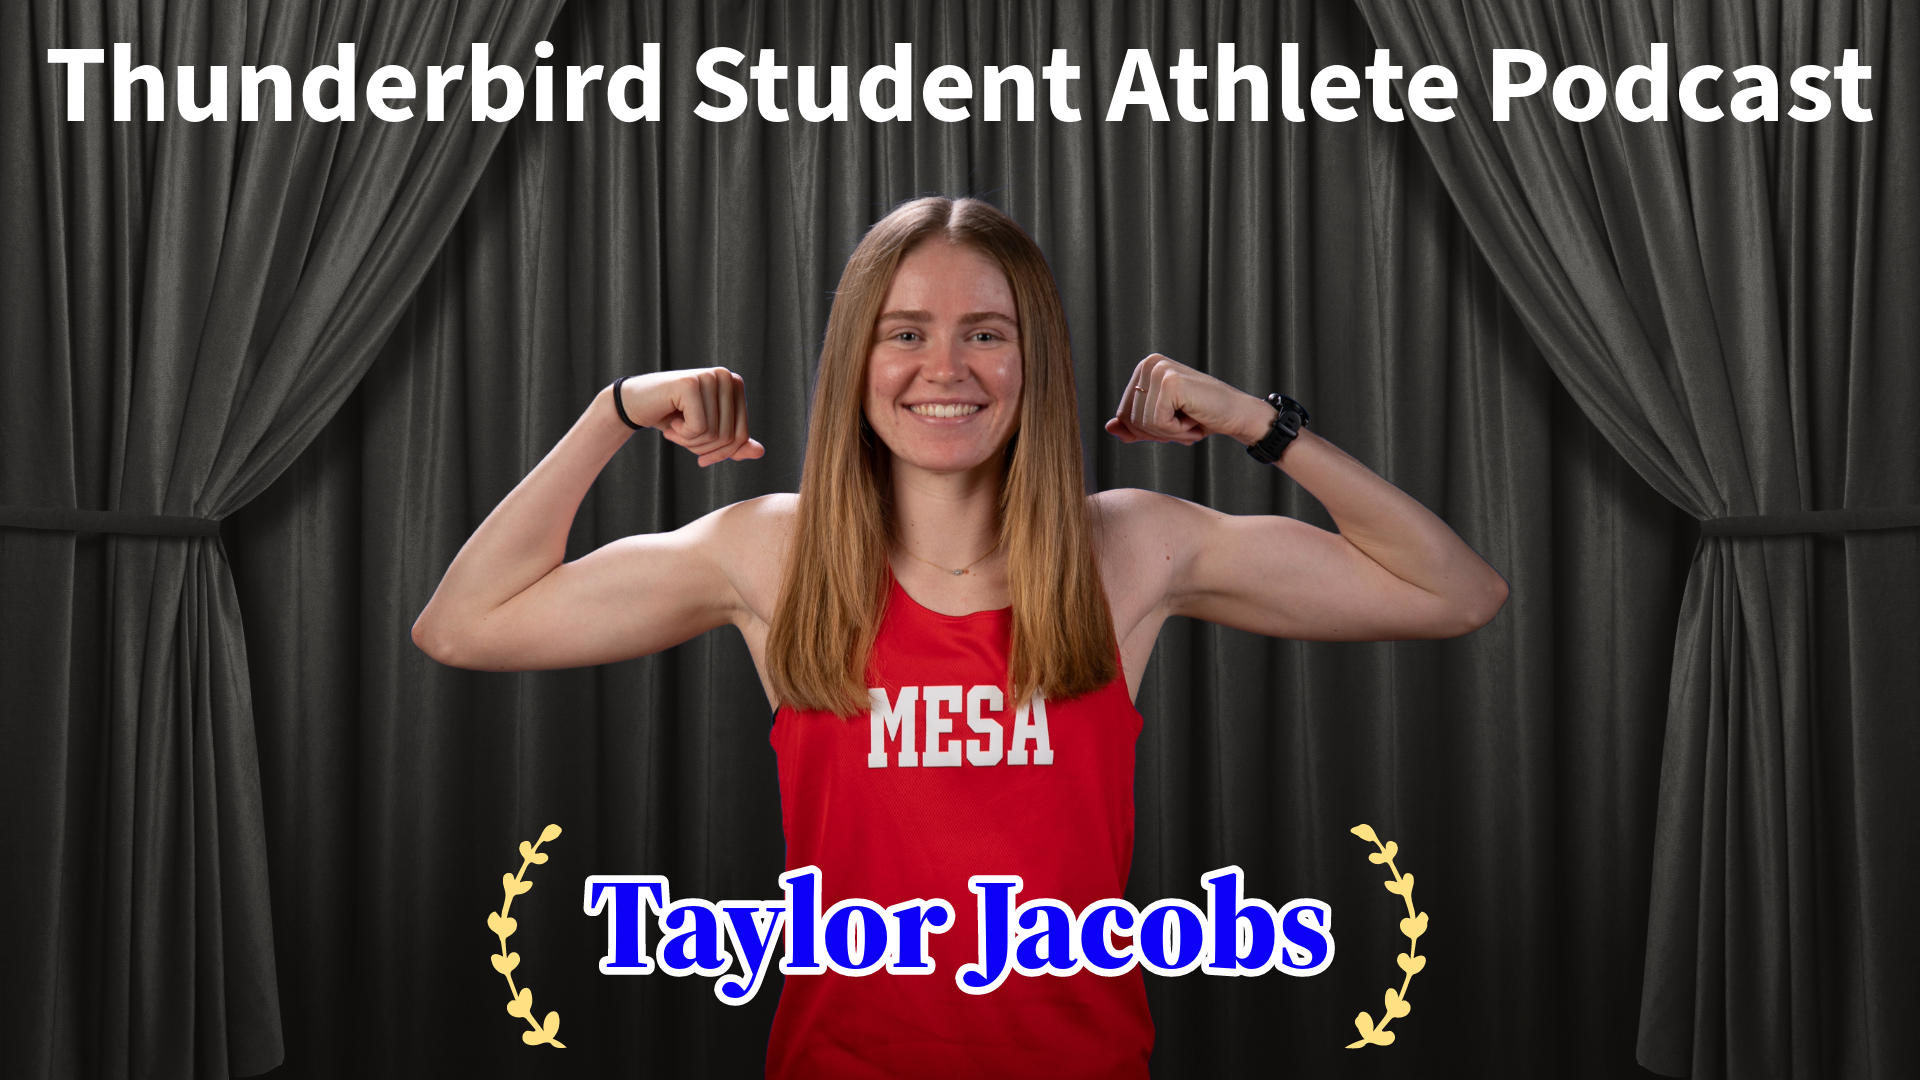 Thunderbird Student Athlete Podcast featuring: Taylor Jacobs